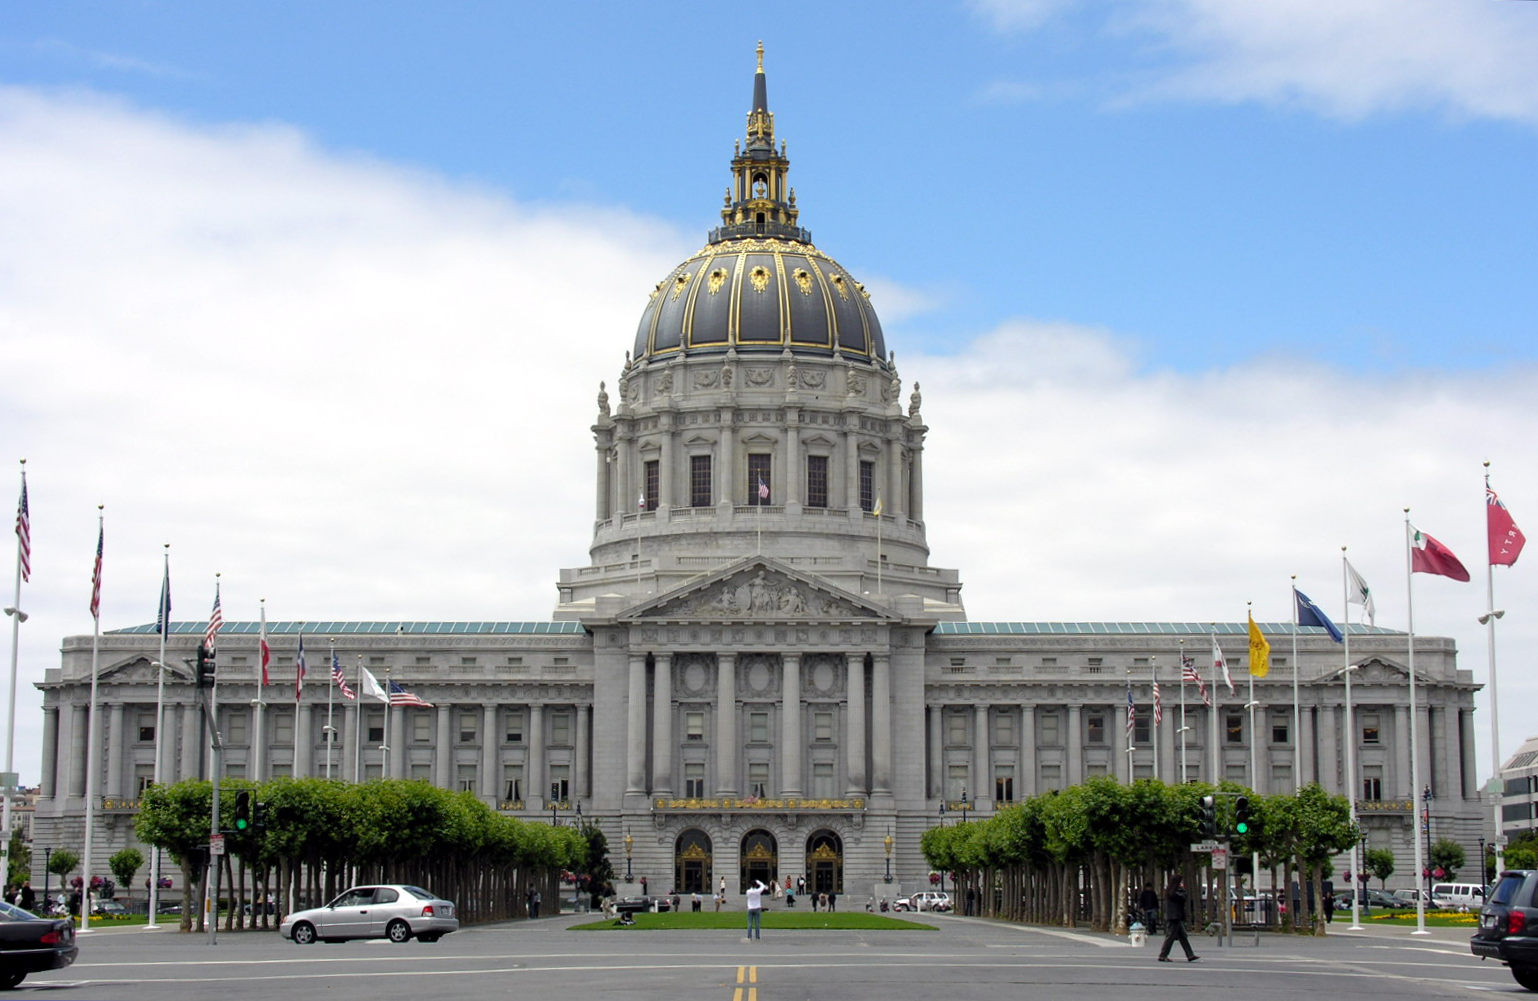 /assets/contentimages/SFCityHall.png